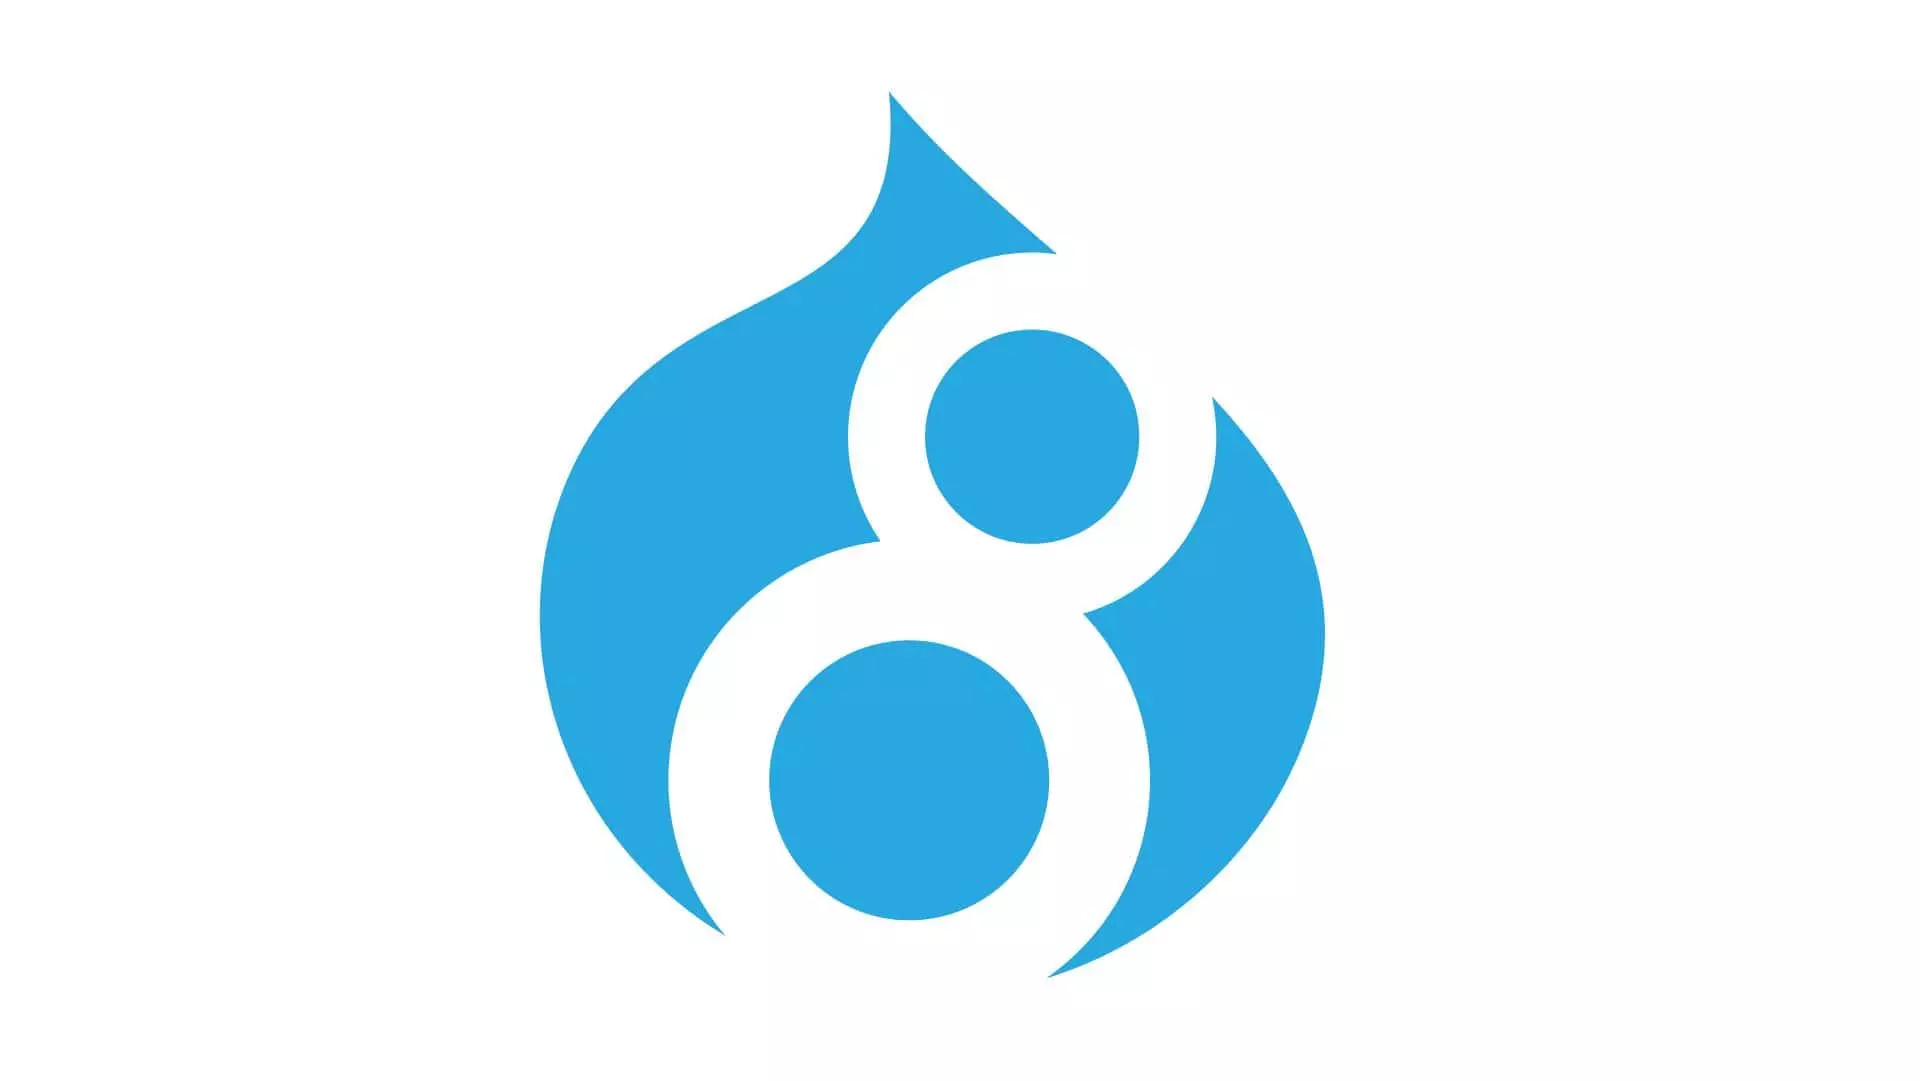 What can we expect from Drupal 8?